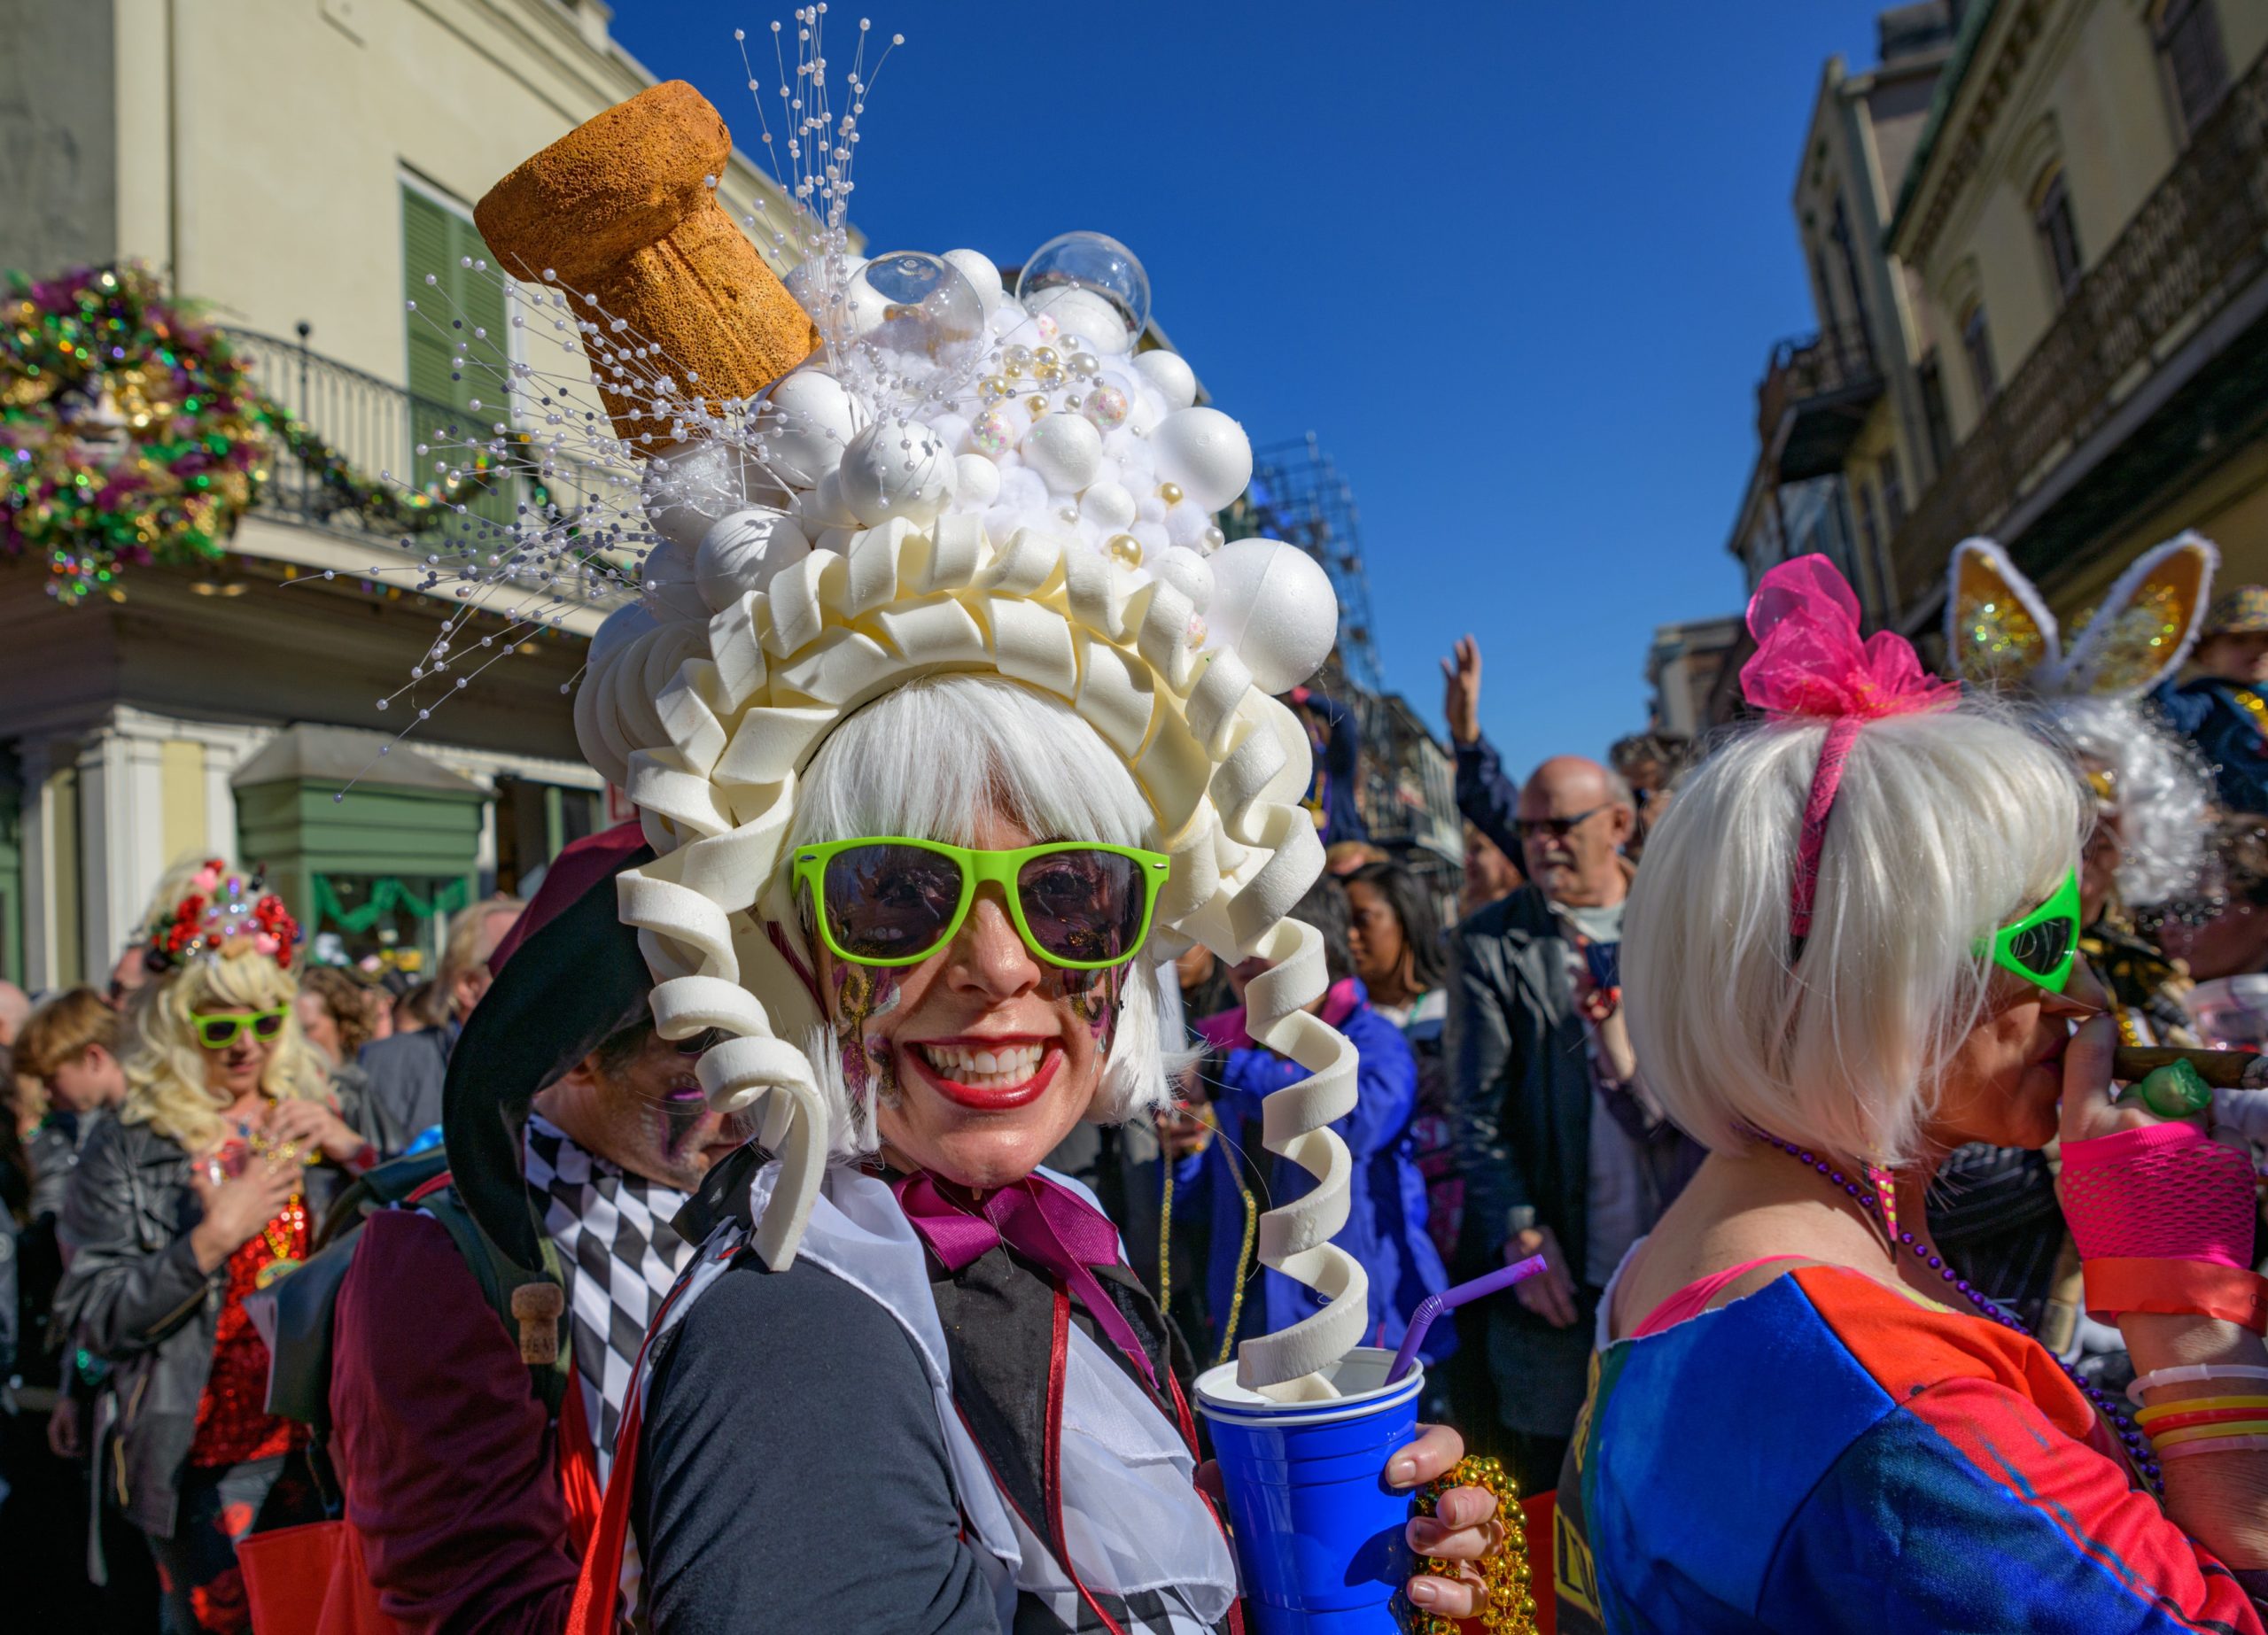 It was a lovely day as the Krewe of Cork stomped in the name of love on St. Valentine’s Day, February 14, 2020 in the French Quarter. Love and bubbles filled the air as the tiny bubbles of champagne filled the appetites of the walking krewe starting from the Court of Two Sisters on Royal Street. Patrick Van Hoorebeek again reigned as king for the 20th parade in 2020. Van Hoorebeek was joined by a host of queens including Margarita Bergen, and Charles Smith of Wines of Substance in Walla Walla, Washington, was the Grand Marshal. Here’s a toast to next year when the Krewe will be 21 and can legally drink in 2021. Photo by Matthew Hinton